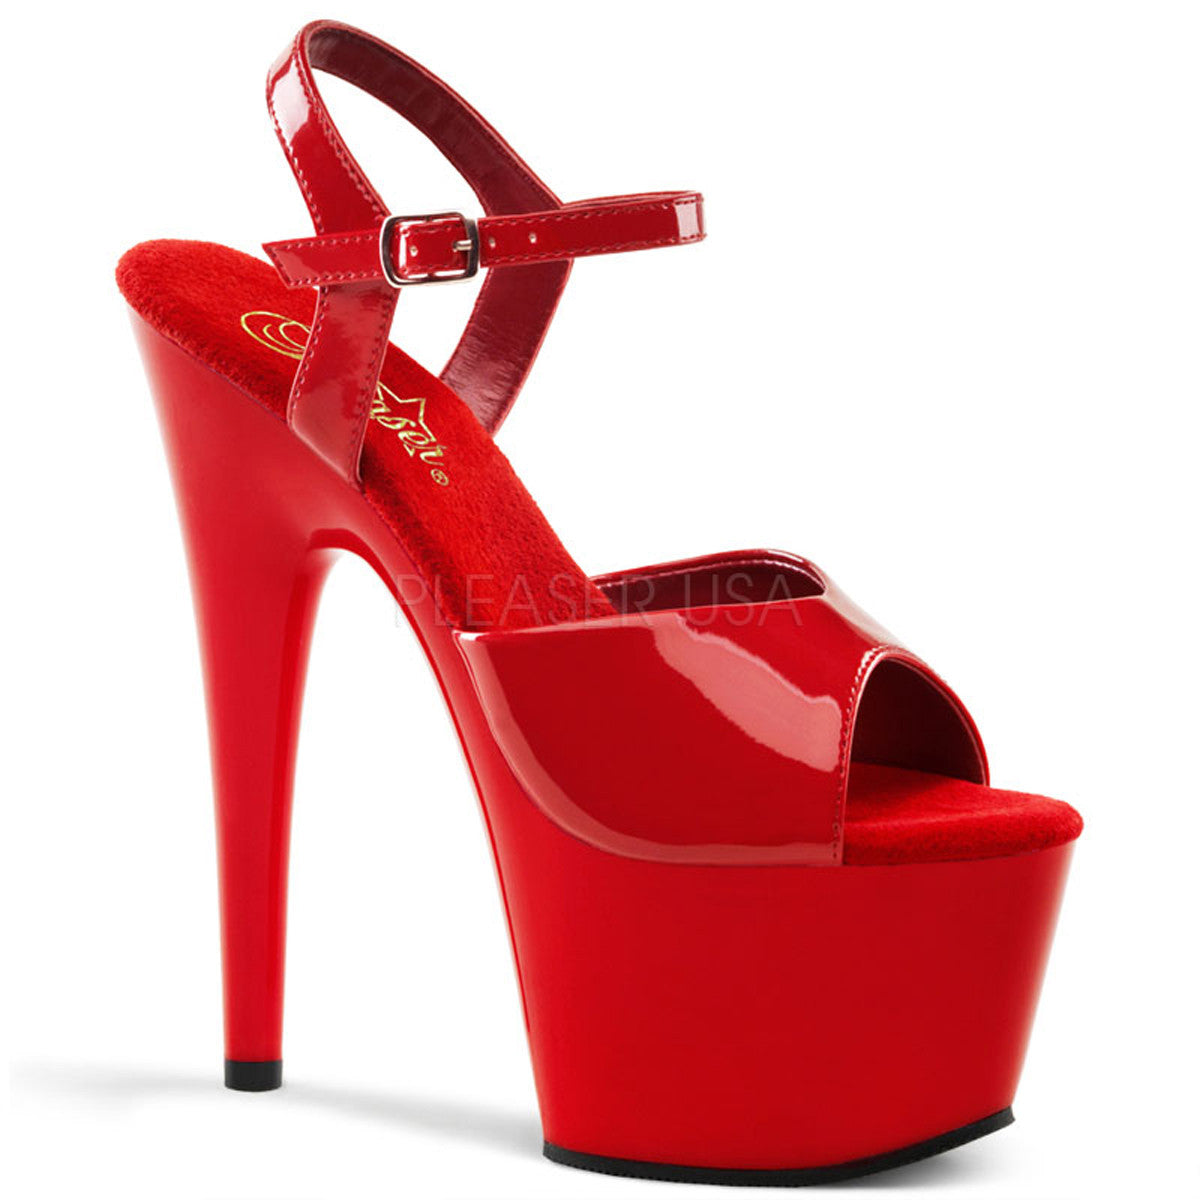 PLEASER ADORE-709 Red-Red Ankle Strap Sandals - Shoecup.com